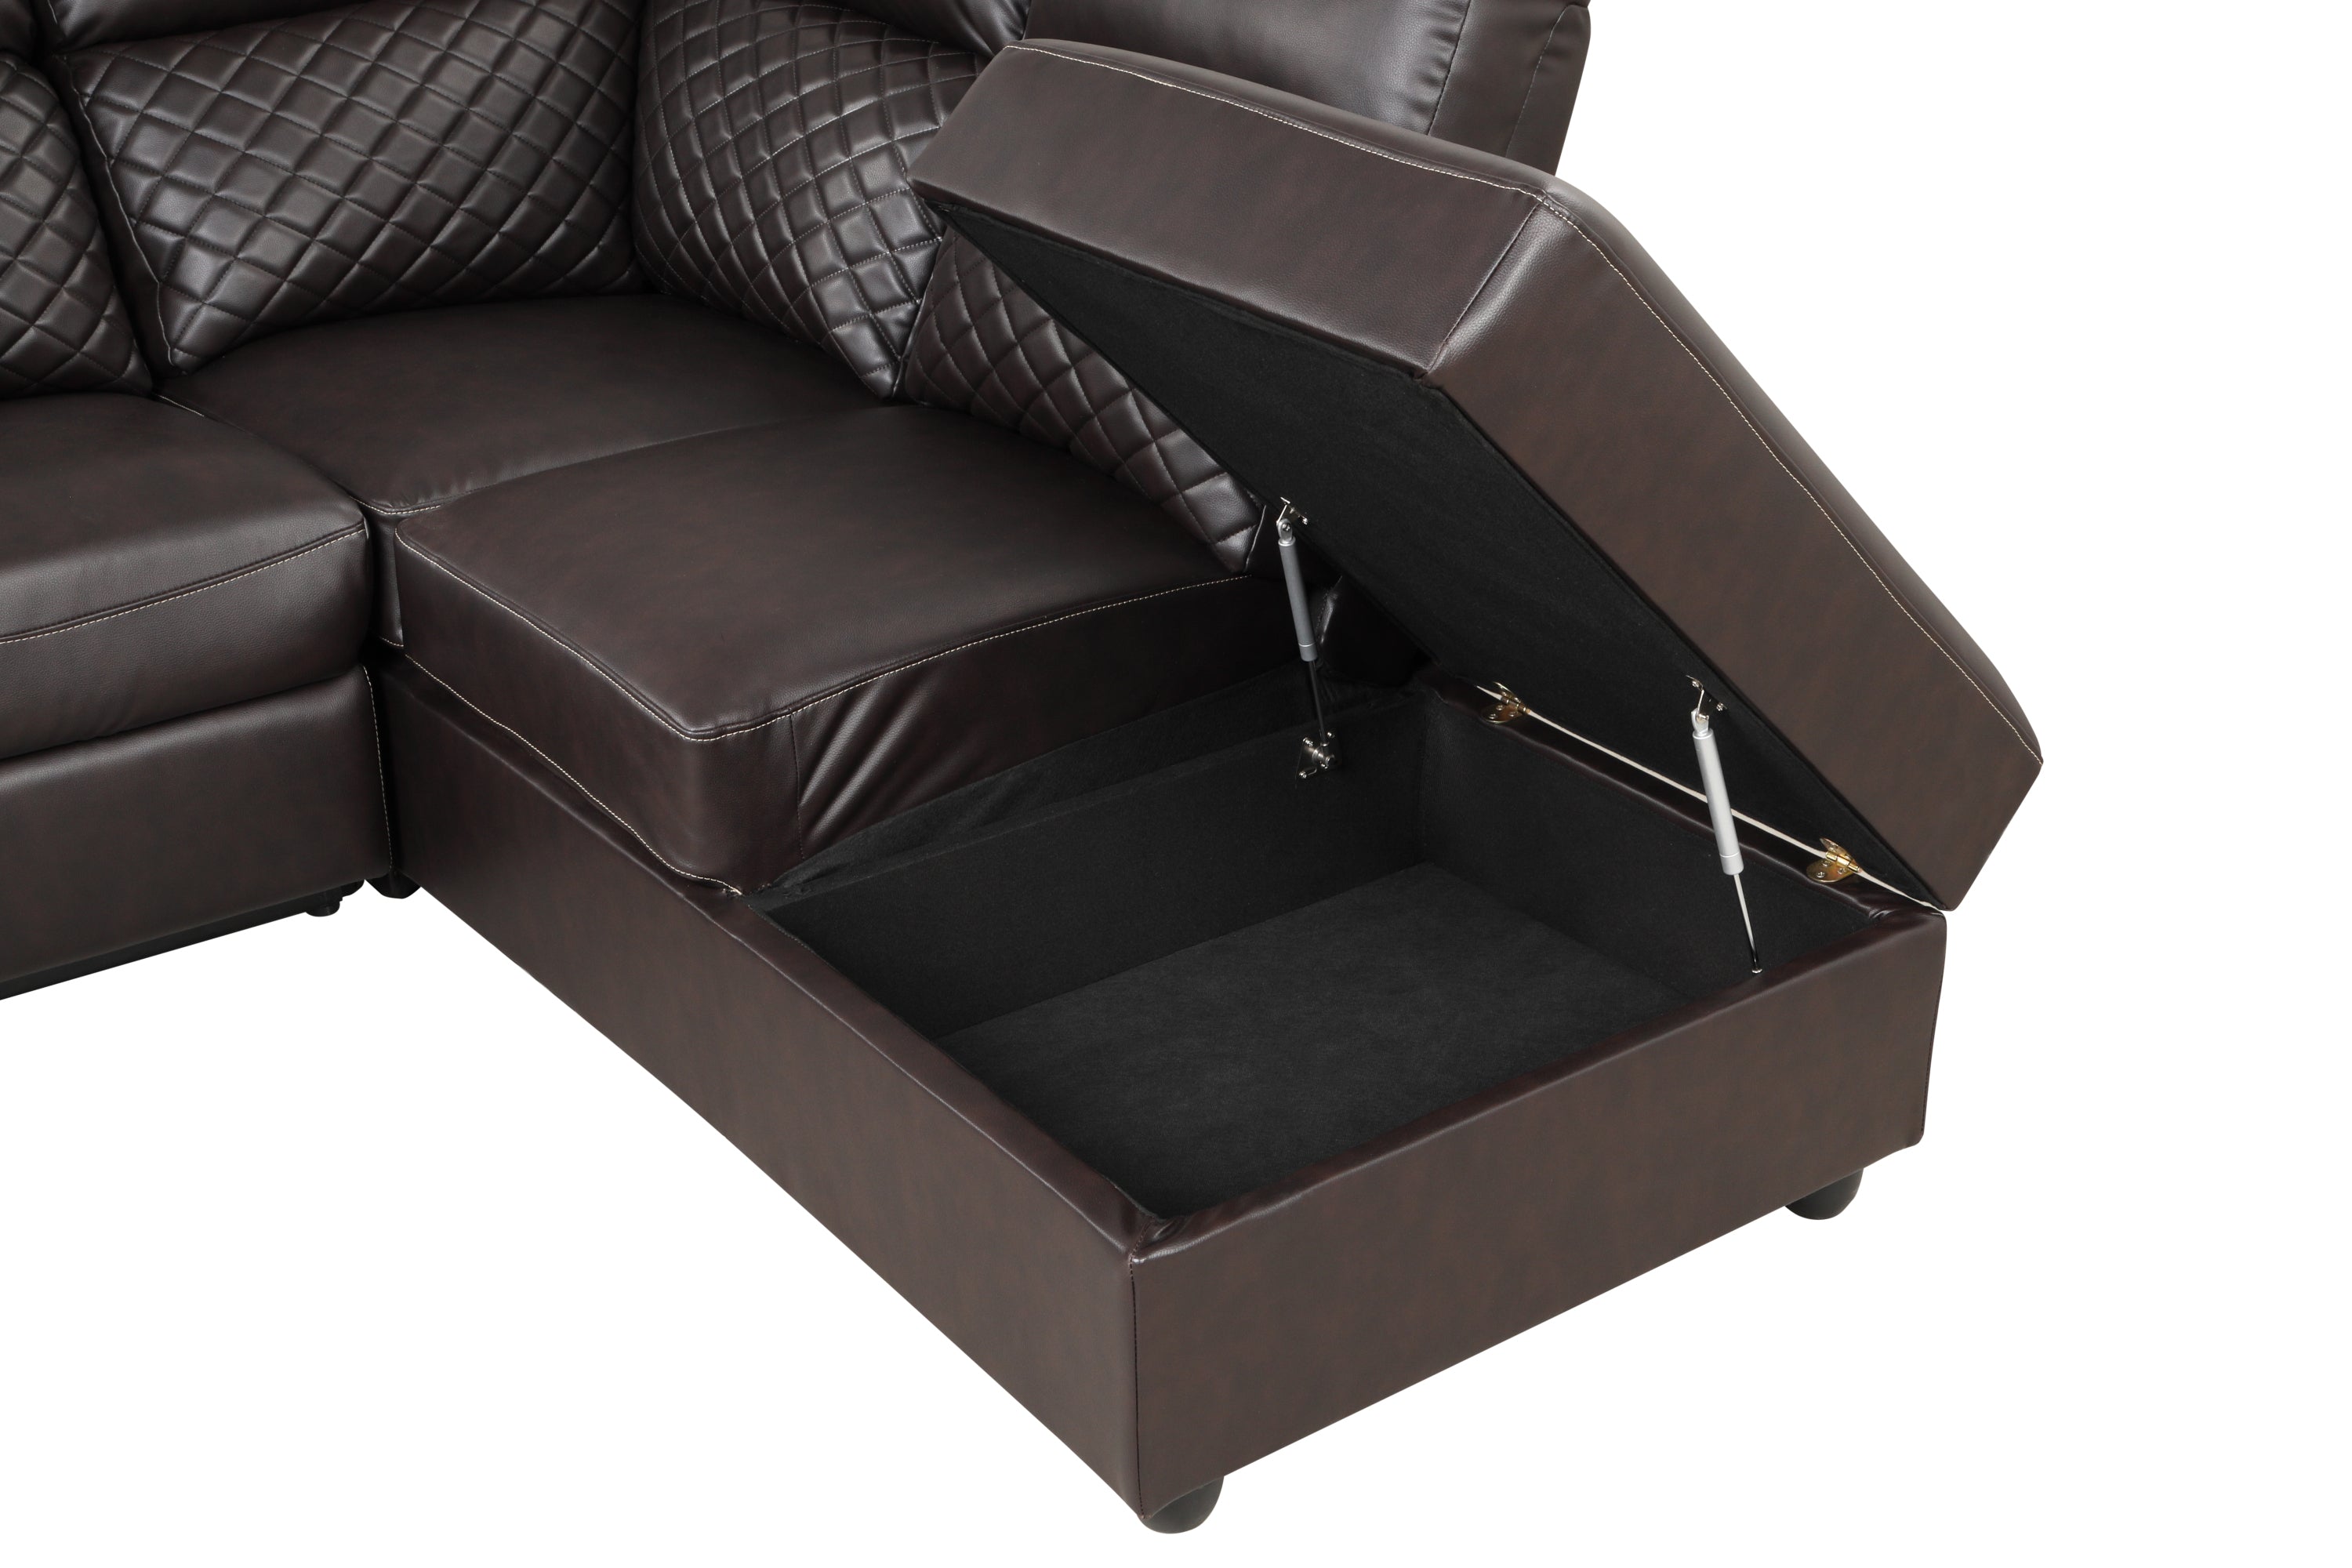 Charlotte Sectional (Brown)